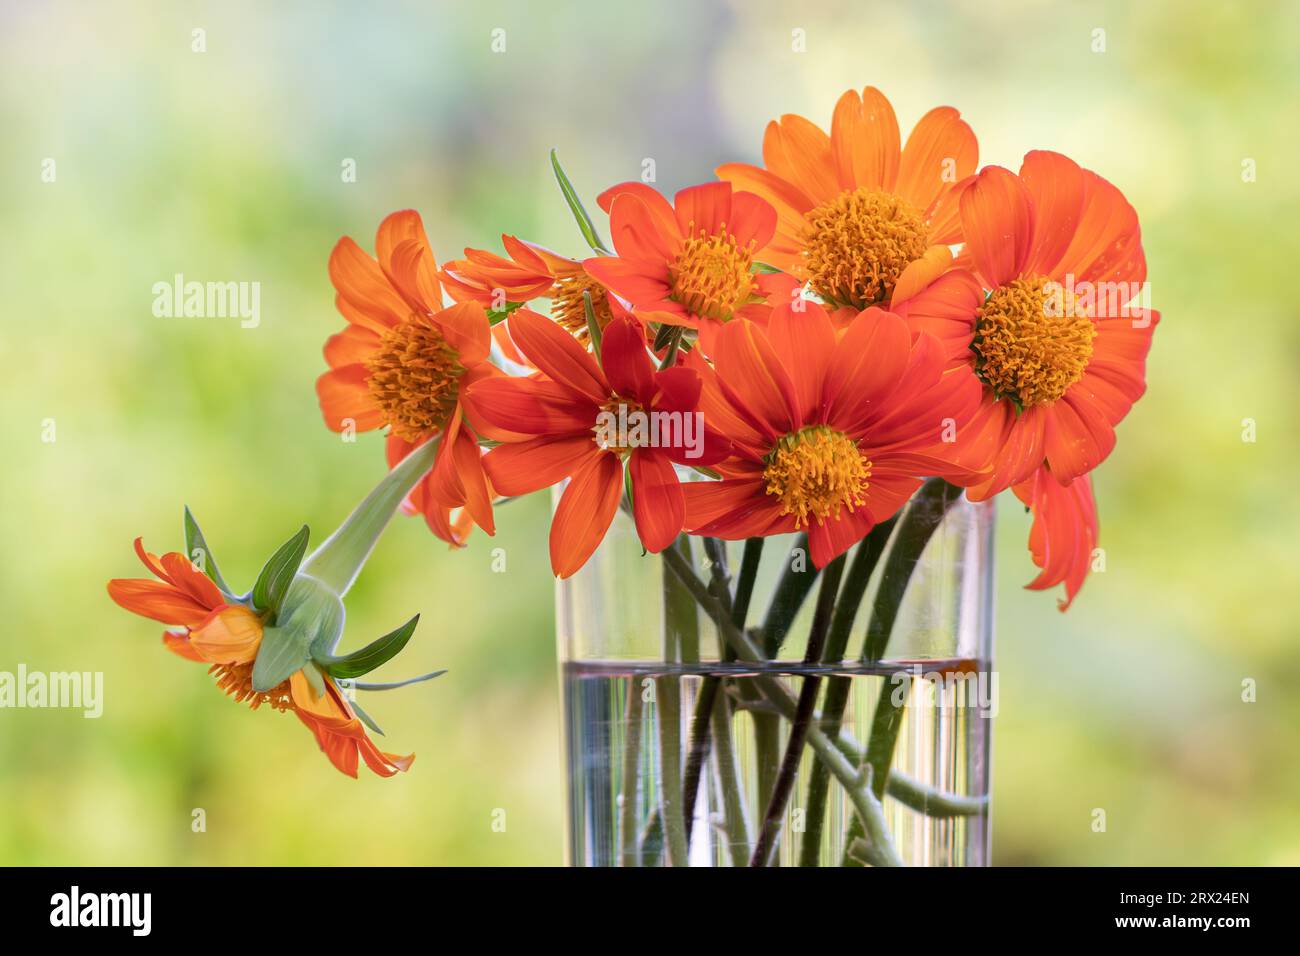 A water glass filled with the cut flowers of Mexican sunflower, Tithonia rotundifolia. Stock Photo